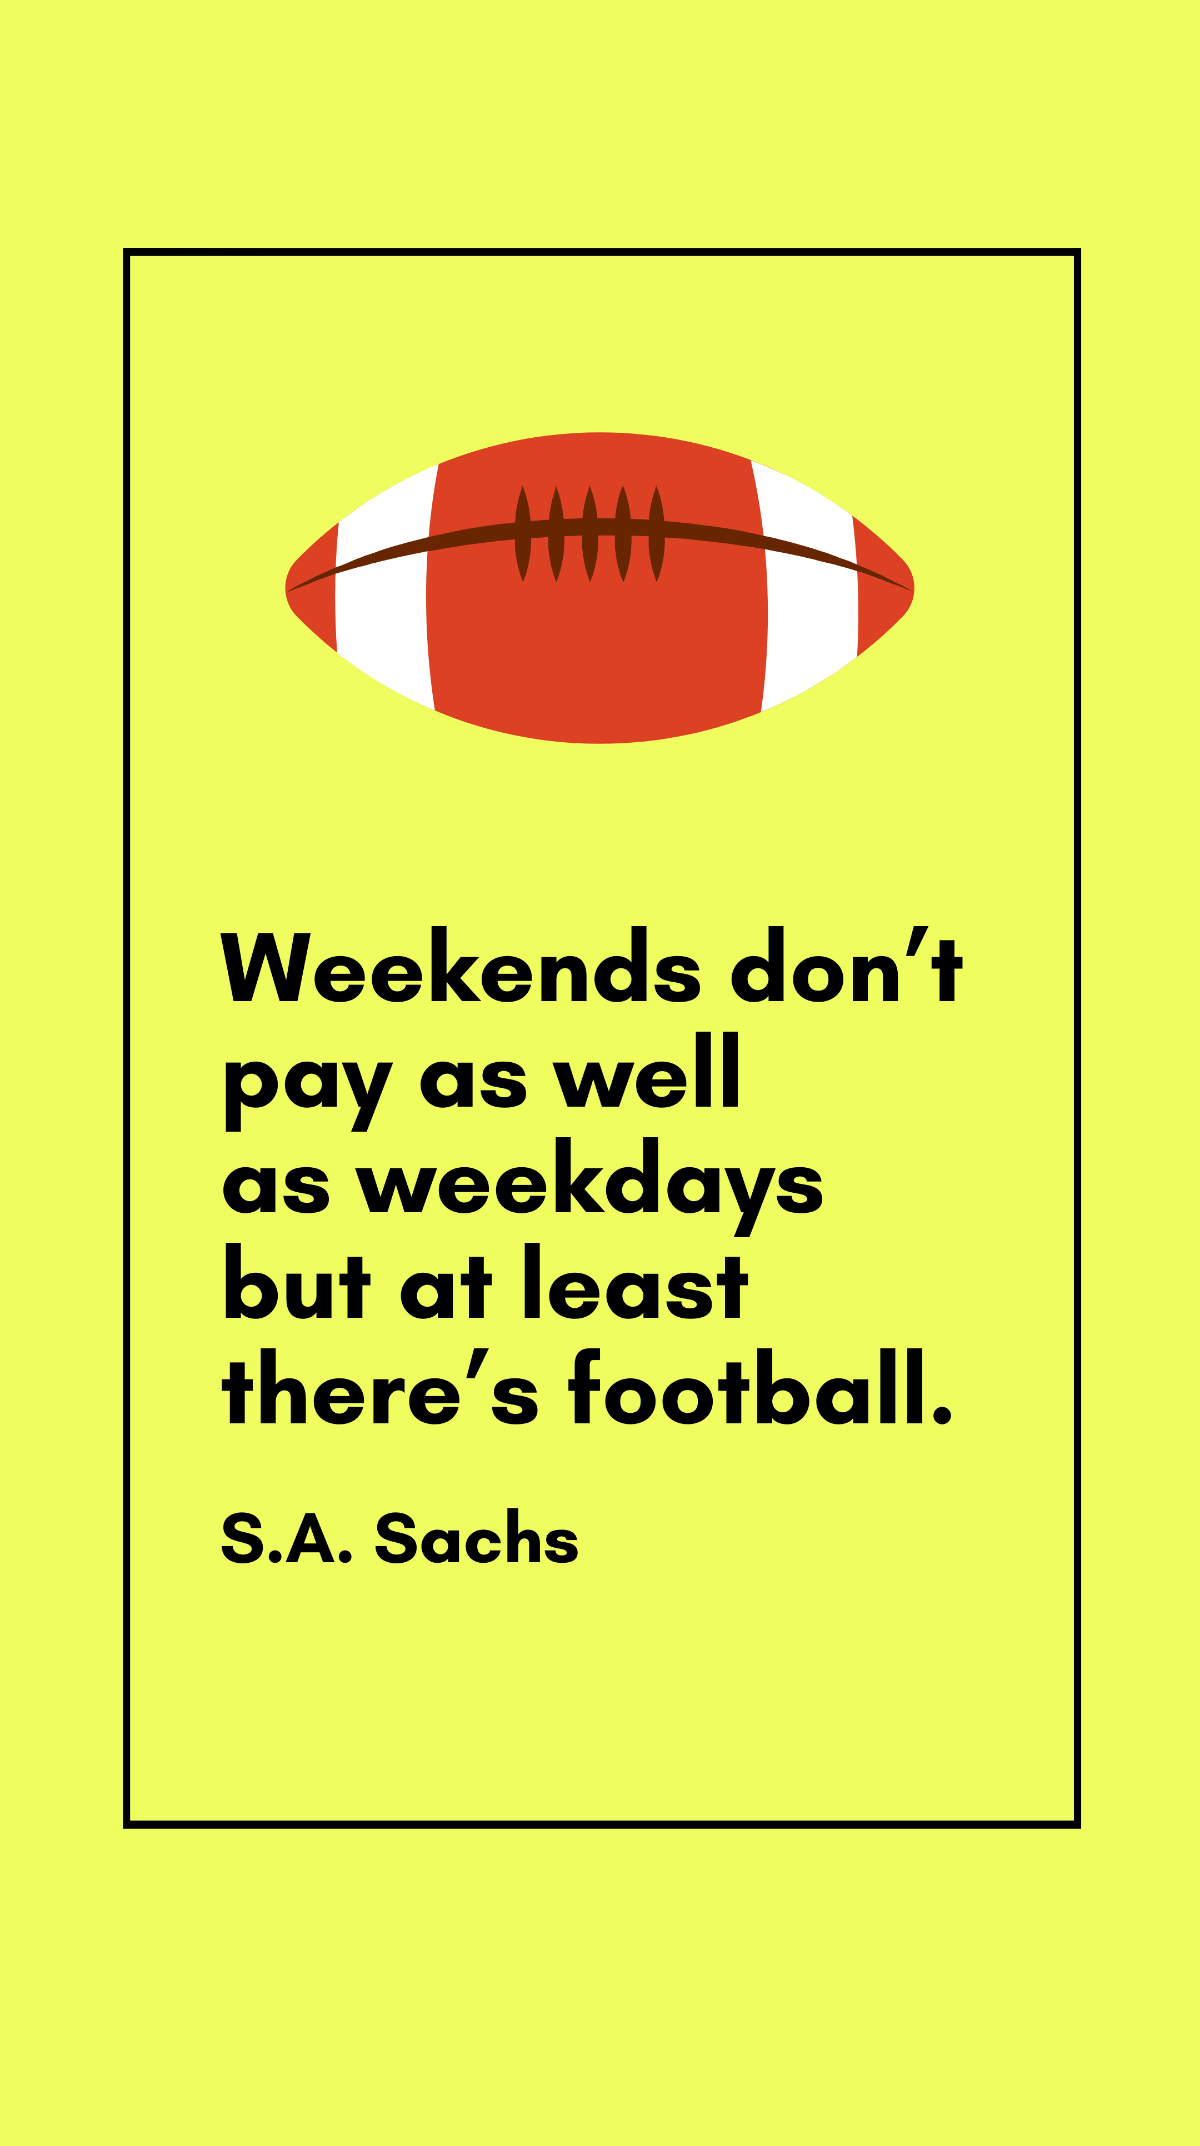 S.A. Sachs - Weekends don’t pay as well as weekdays but at least there’s football. 